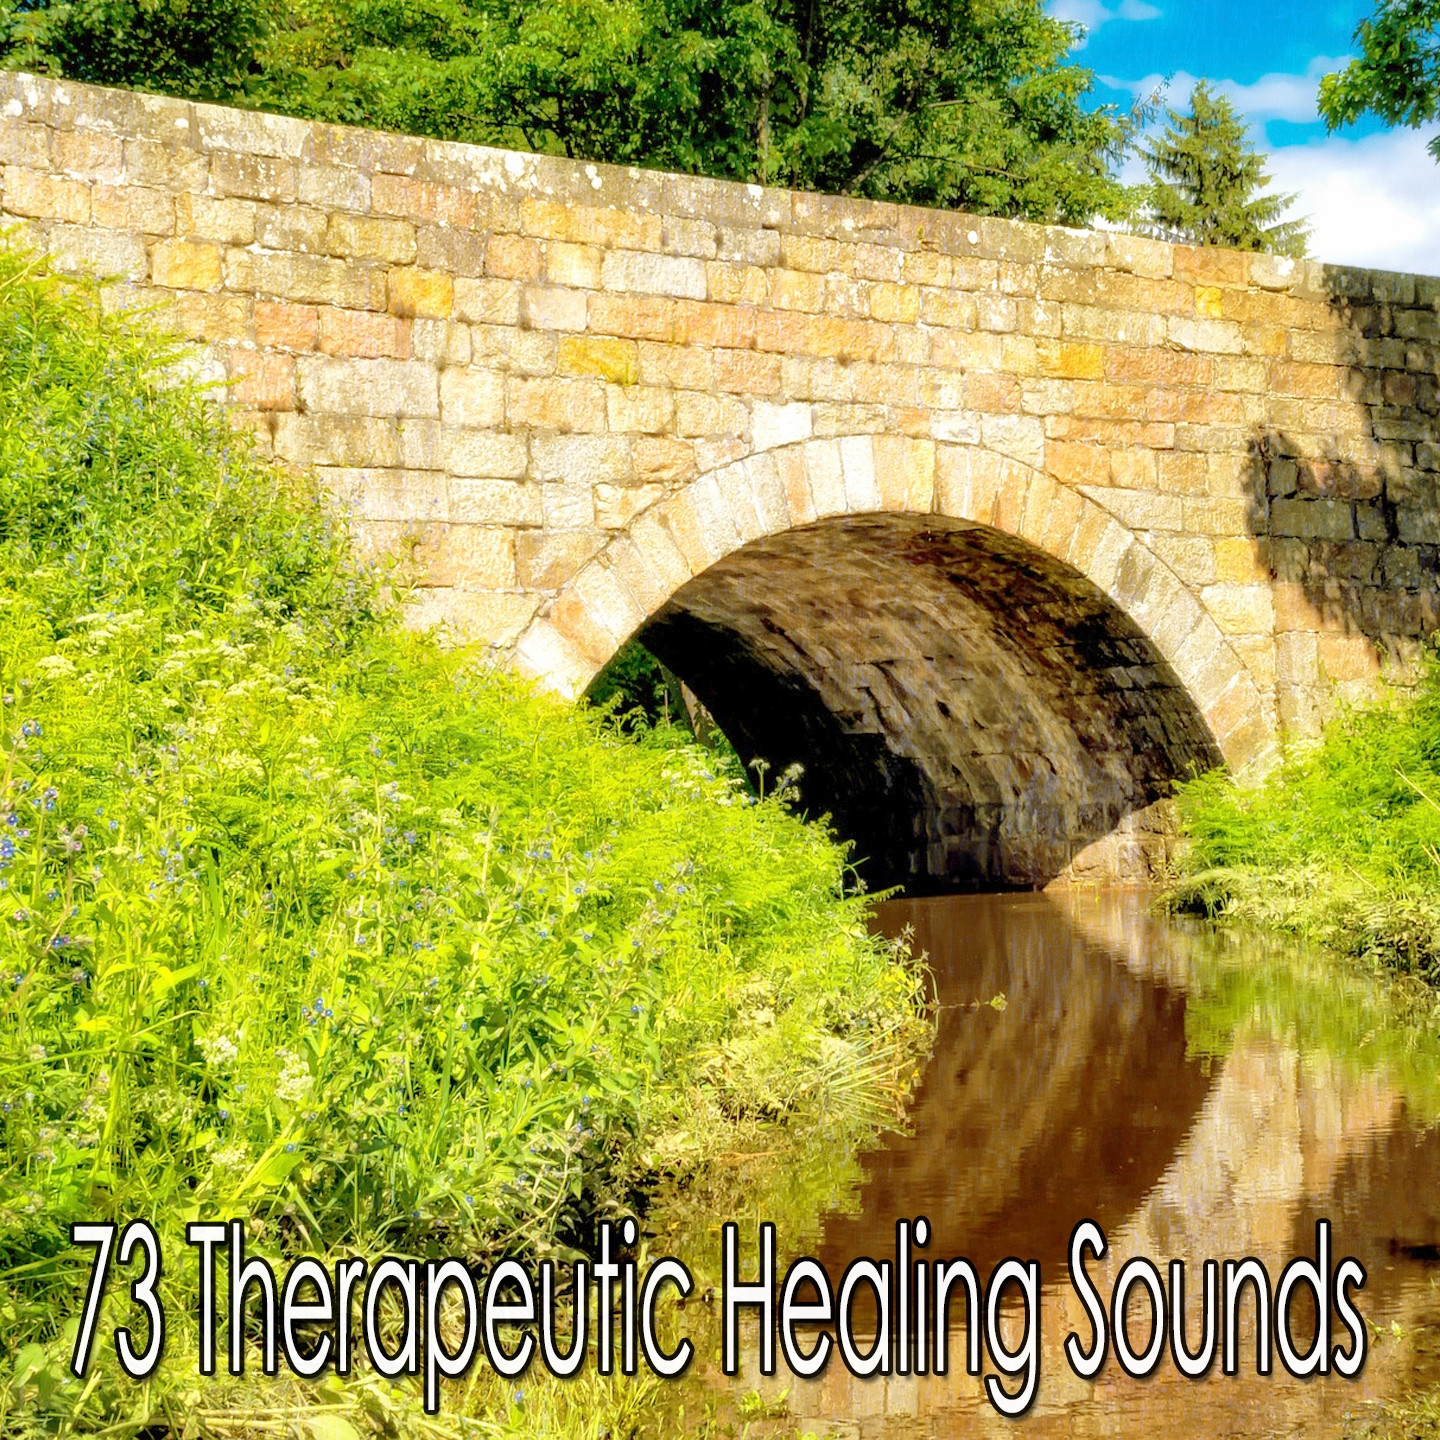 73 Therapeutic Healing Sounds